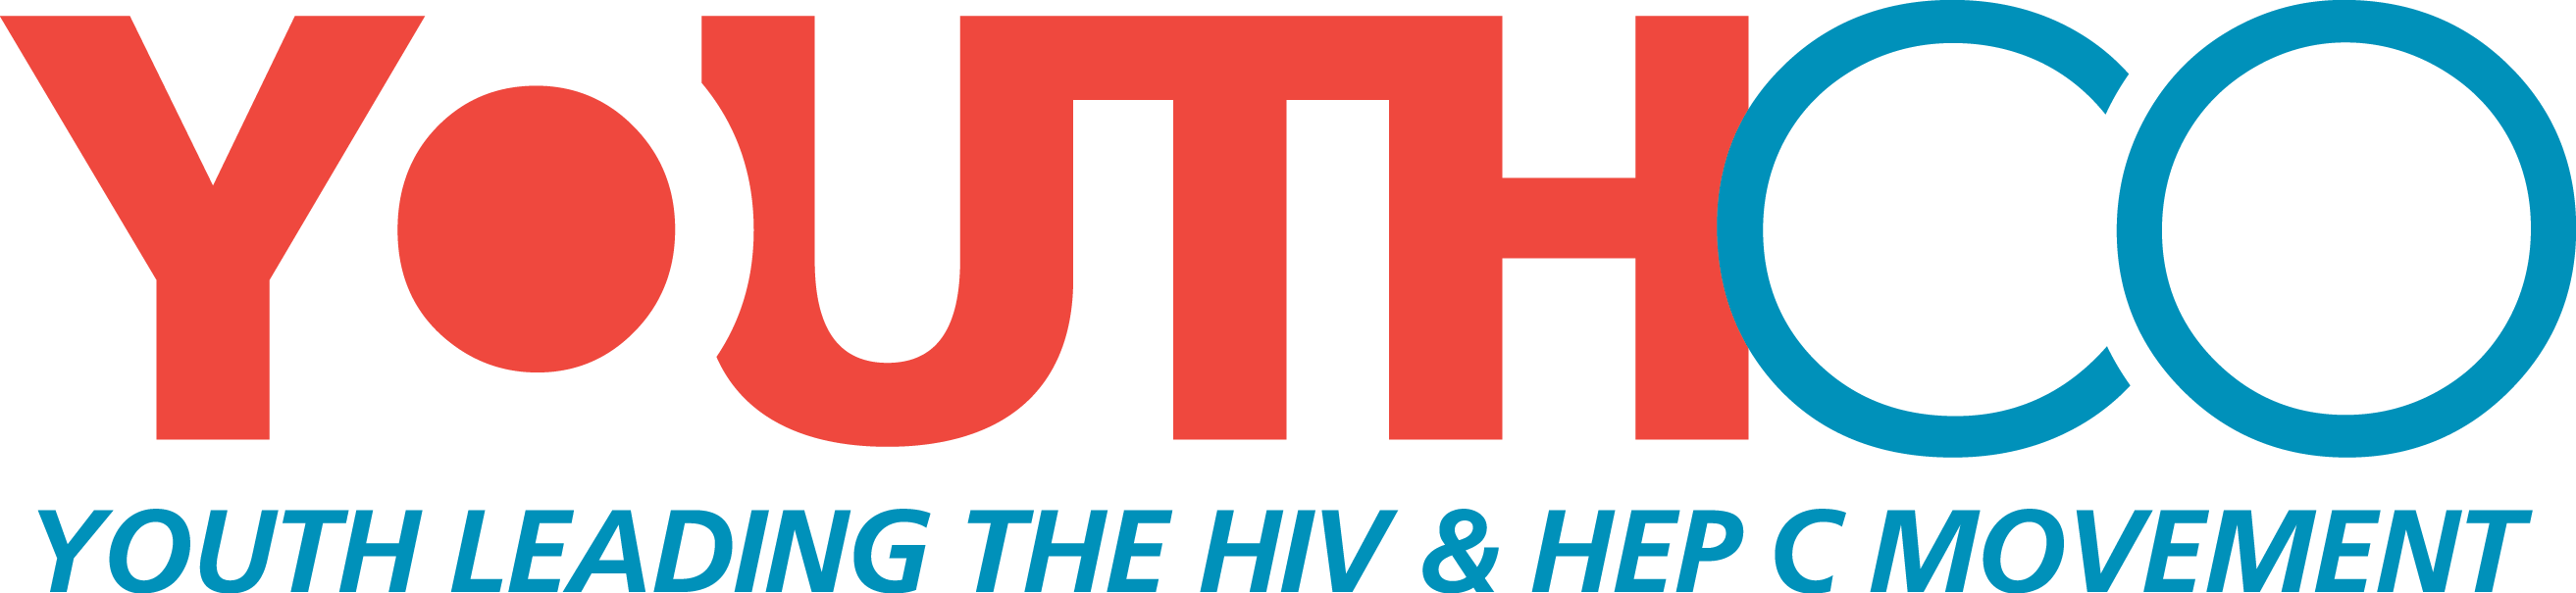 Youthcologo - Hiv/aids (2626x605), Png Download